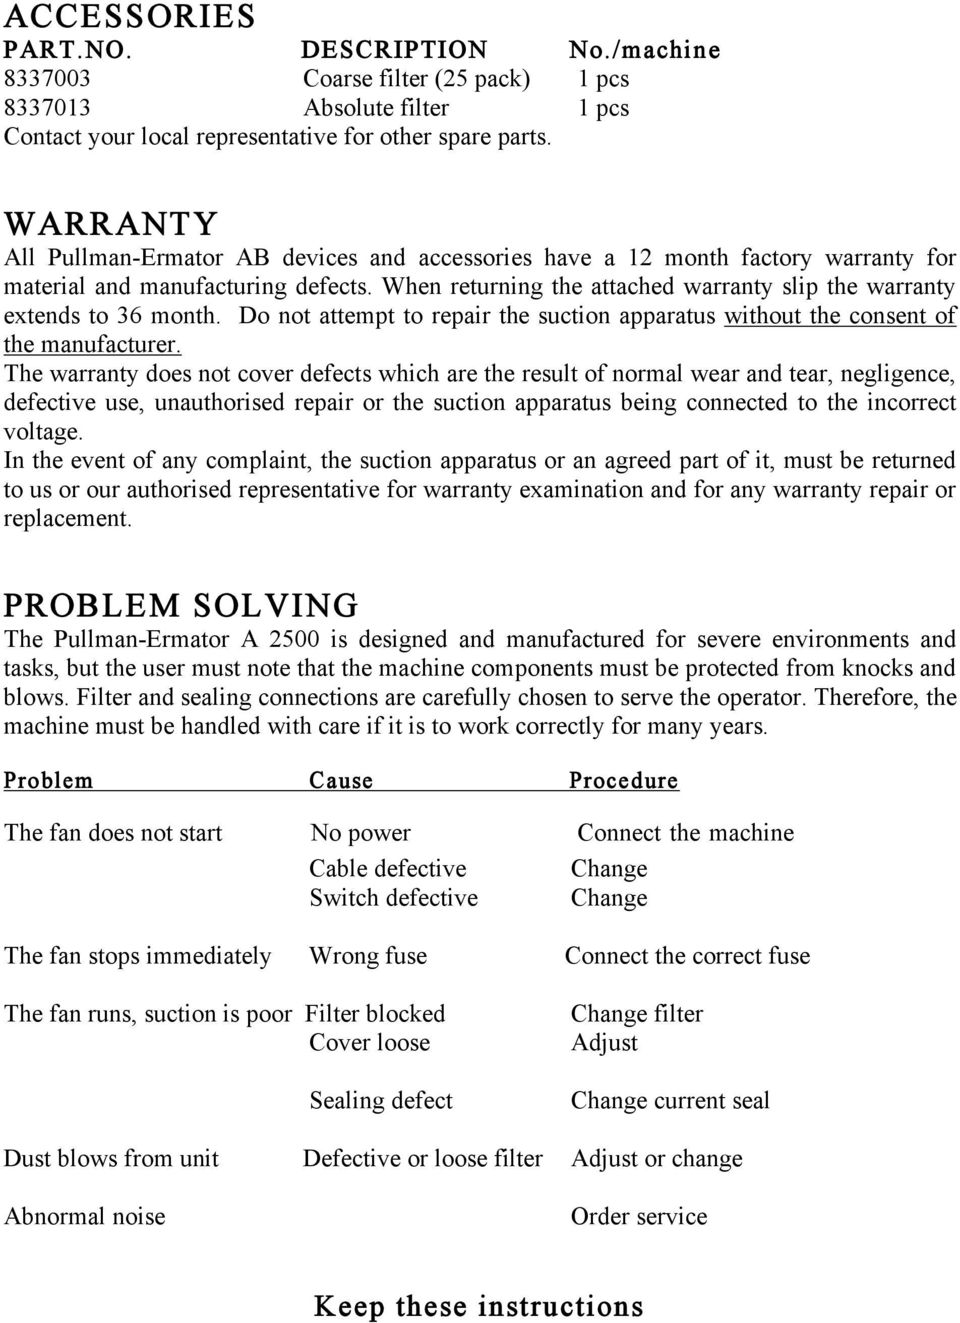 When returning the attached warranty slip the warranty extends to 36 month. Do not attempt to repair the suction apparatus without the consent of the manufacturer.